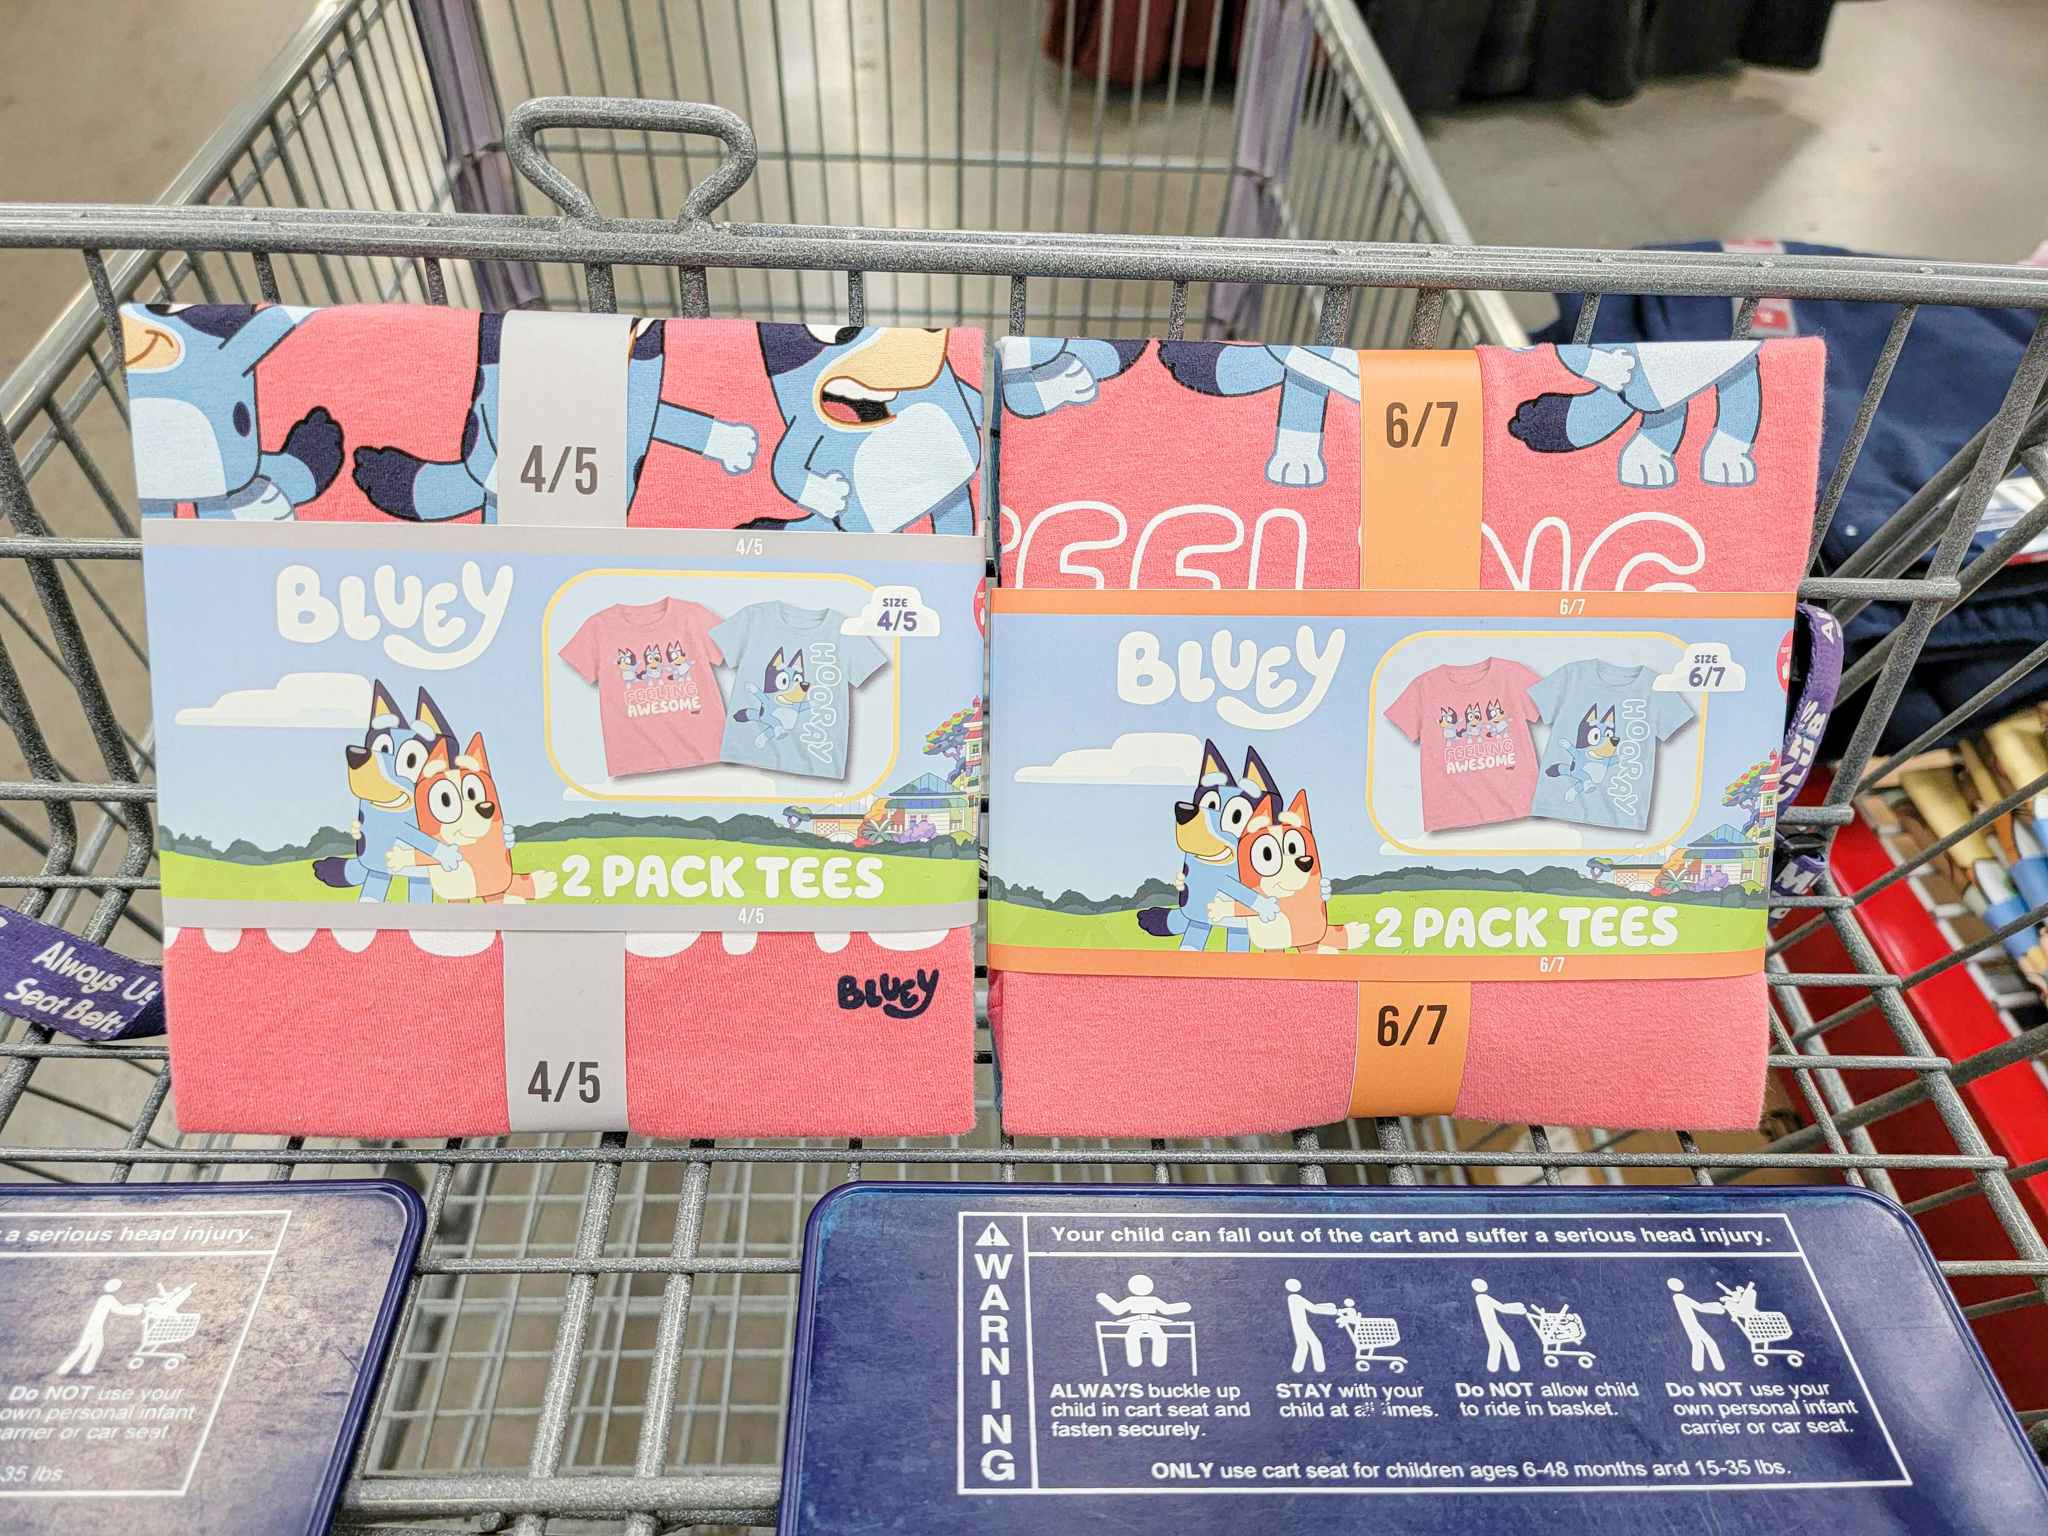 2 packs of bluey tshirts in a cart